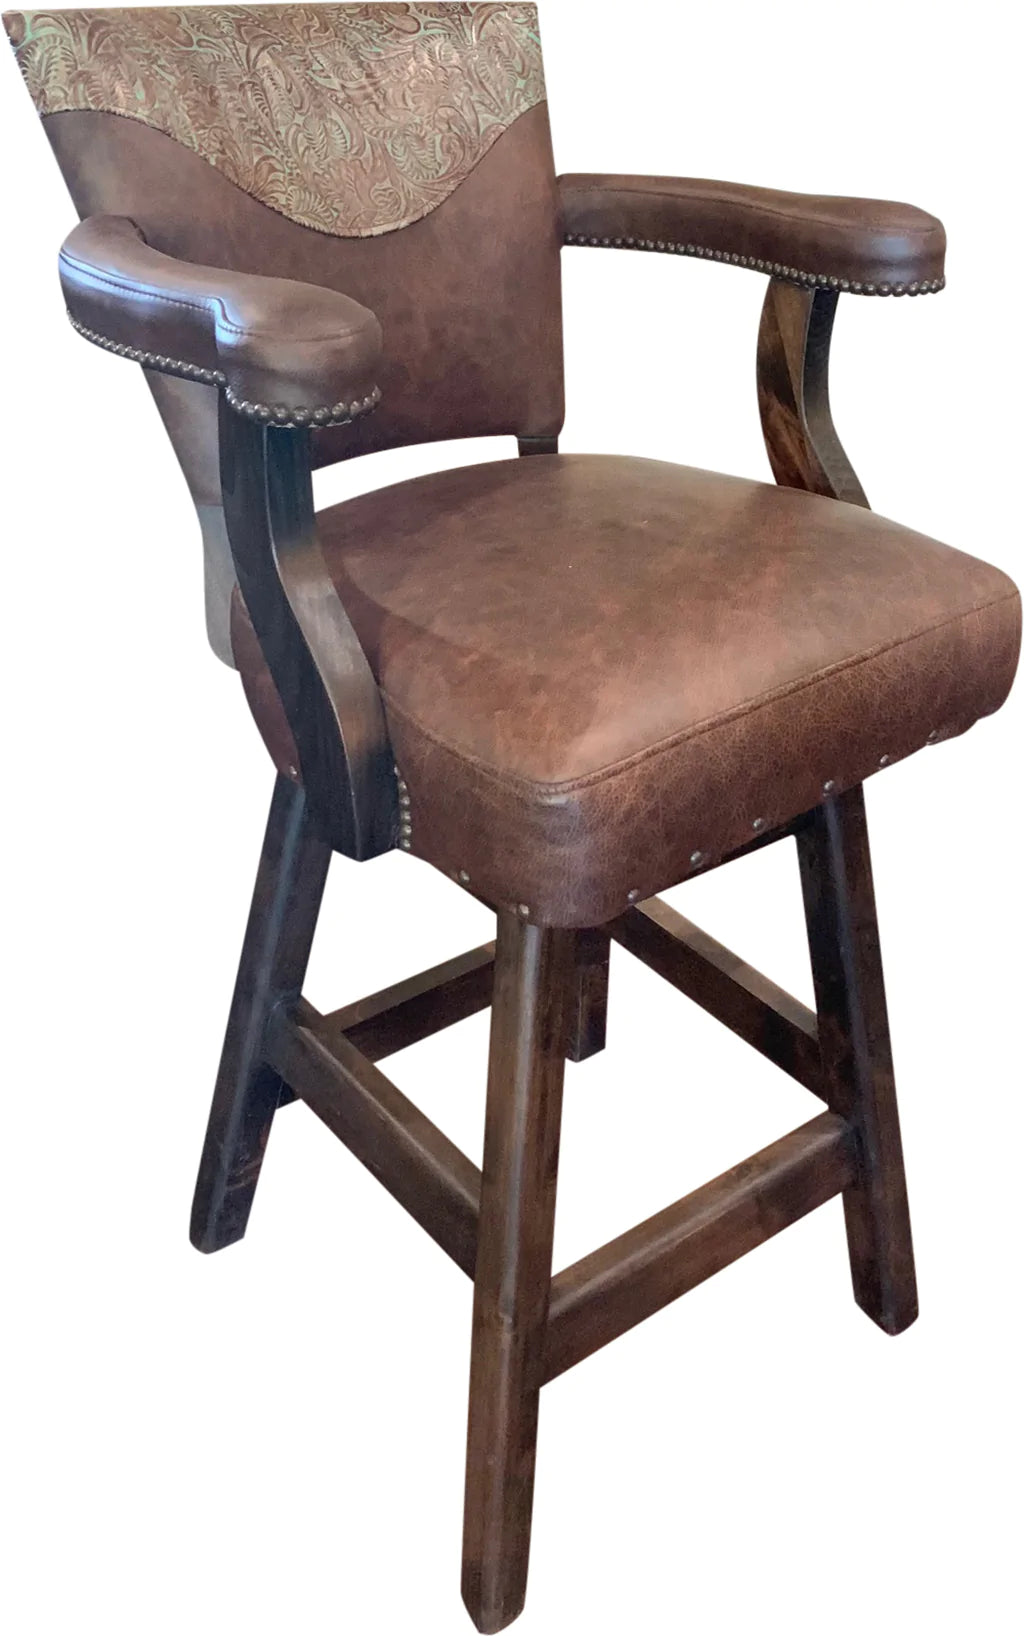 Davenport Ranch Western Leather Barstool Floral Turquoise Brown Counter Height